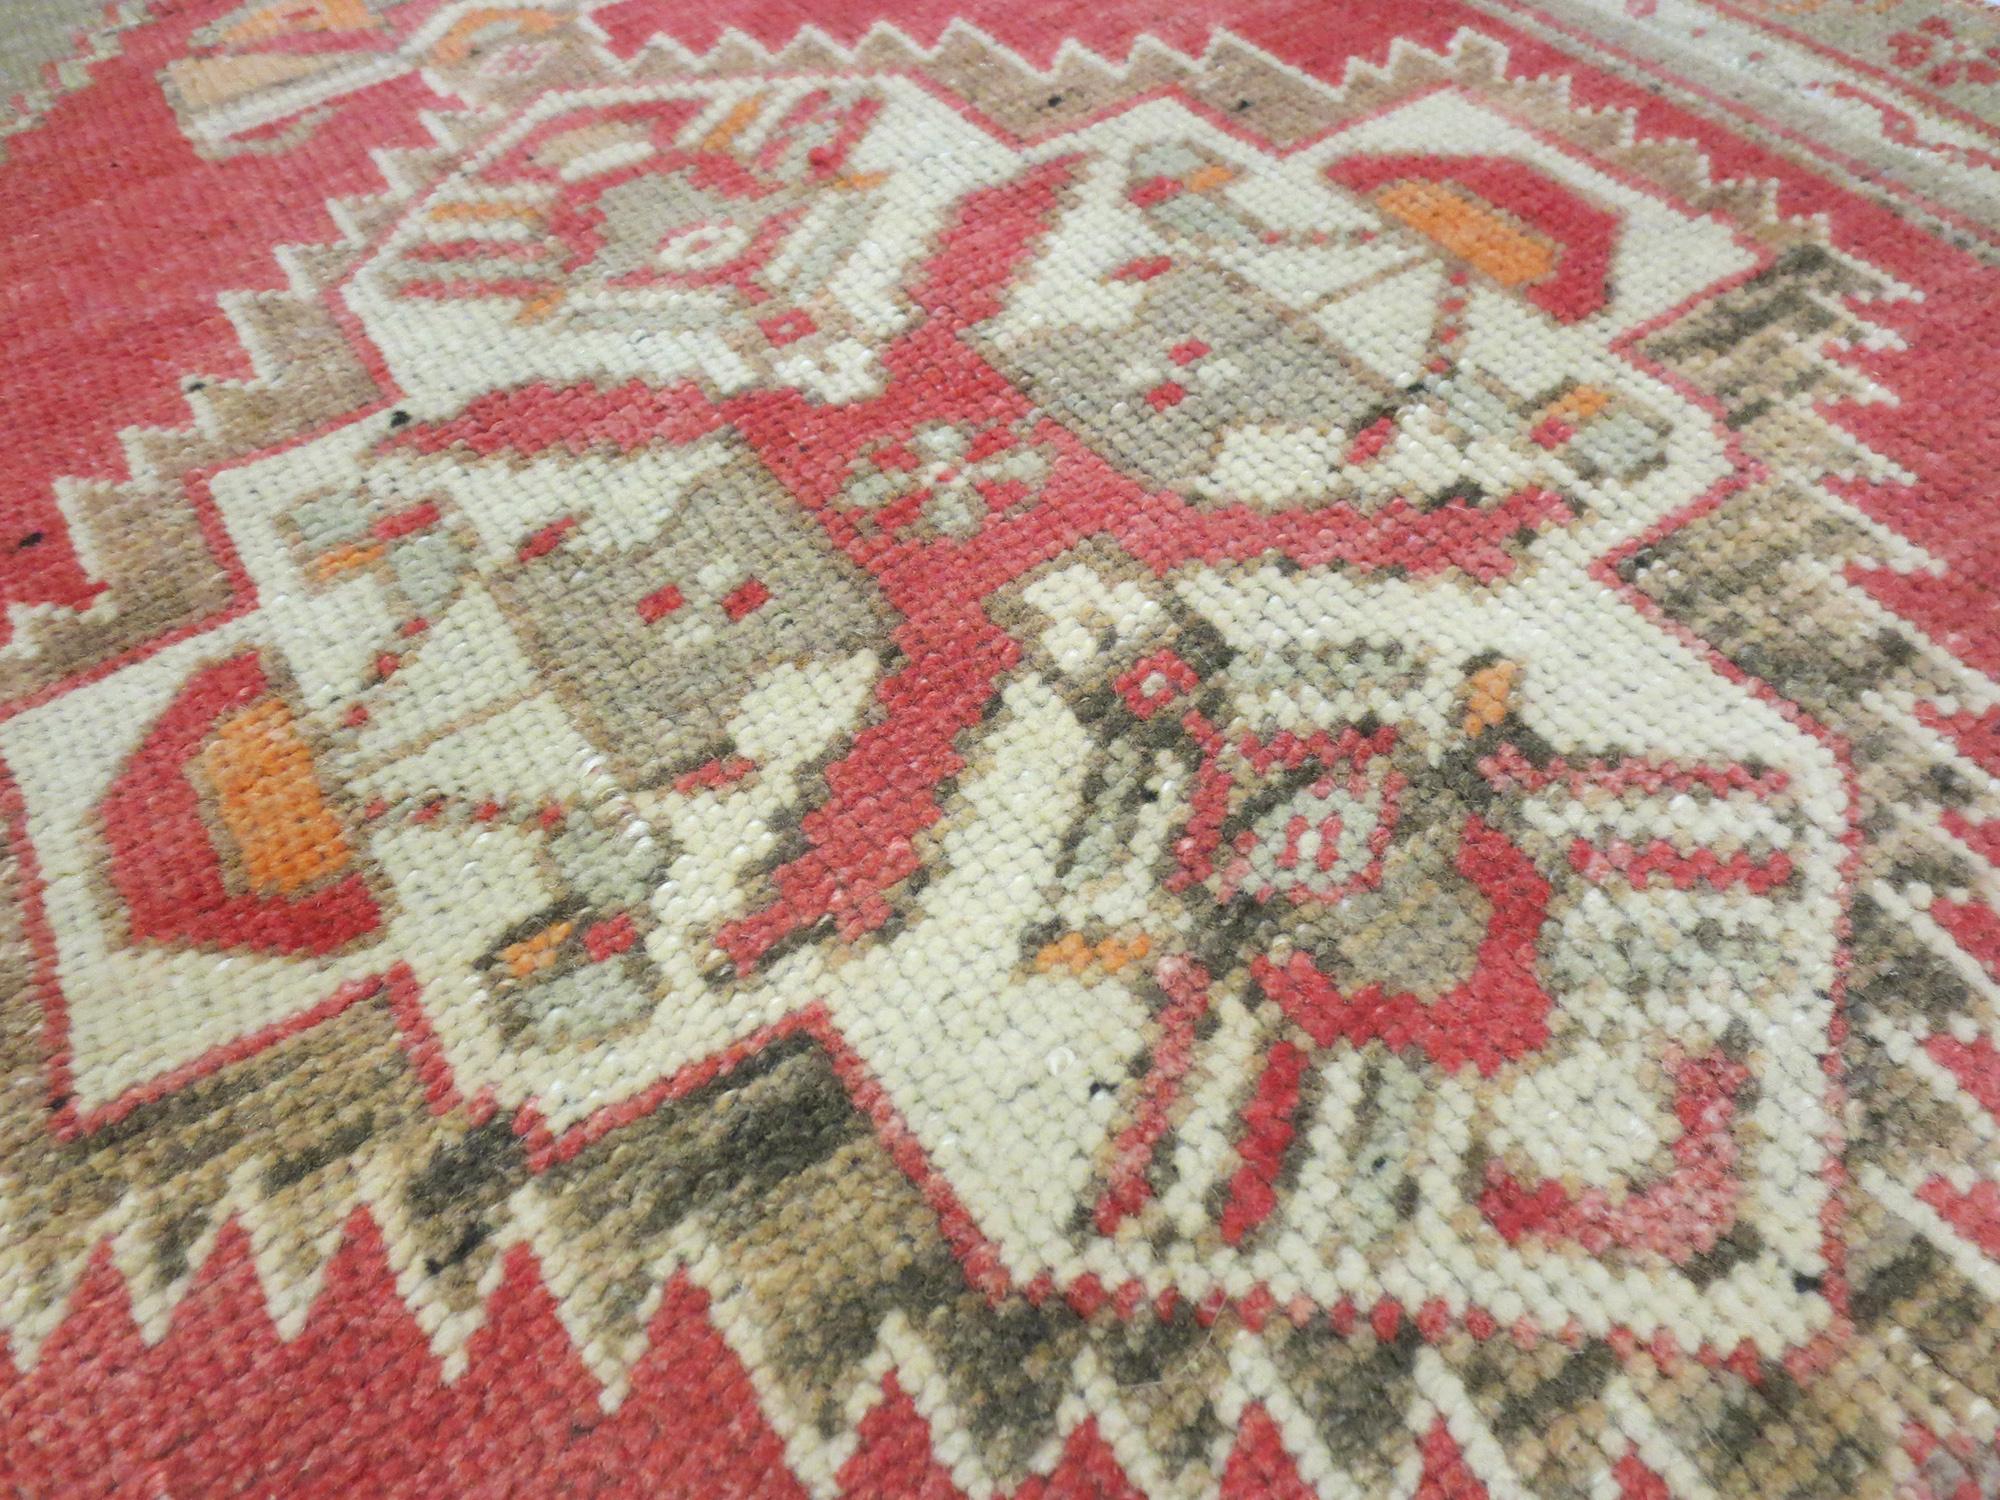 This is a vintage Swedish flat woven runner from the mid-20th century.